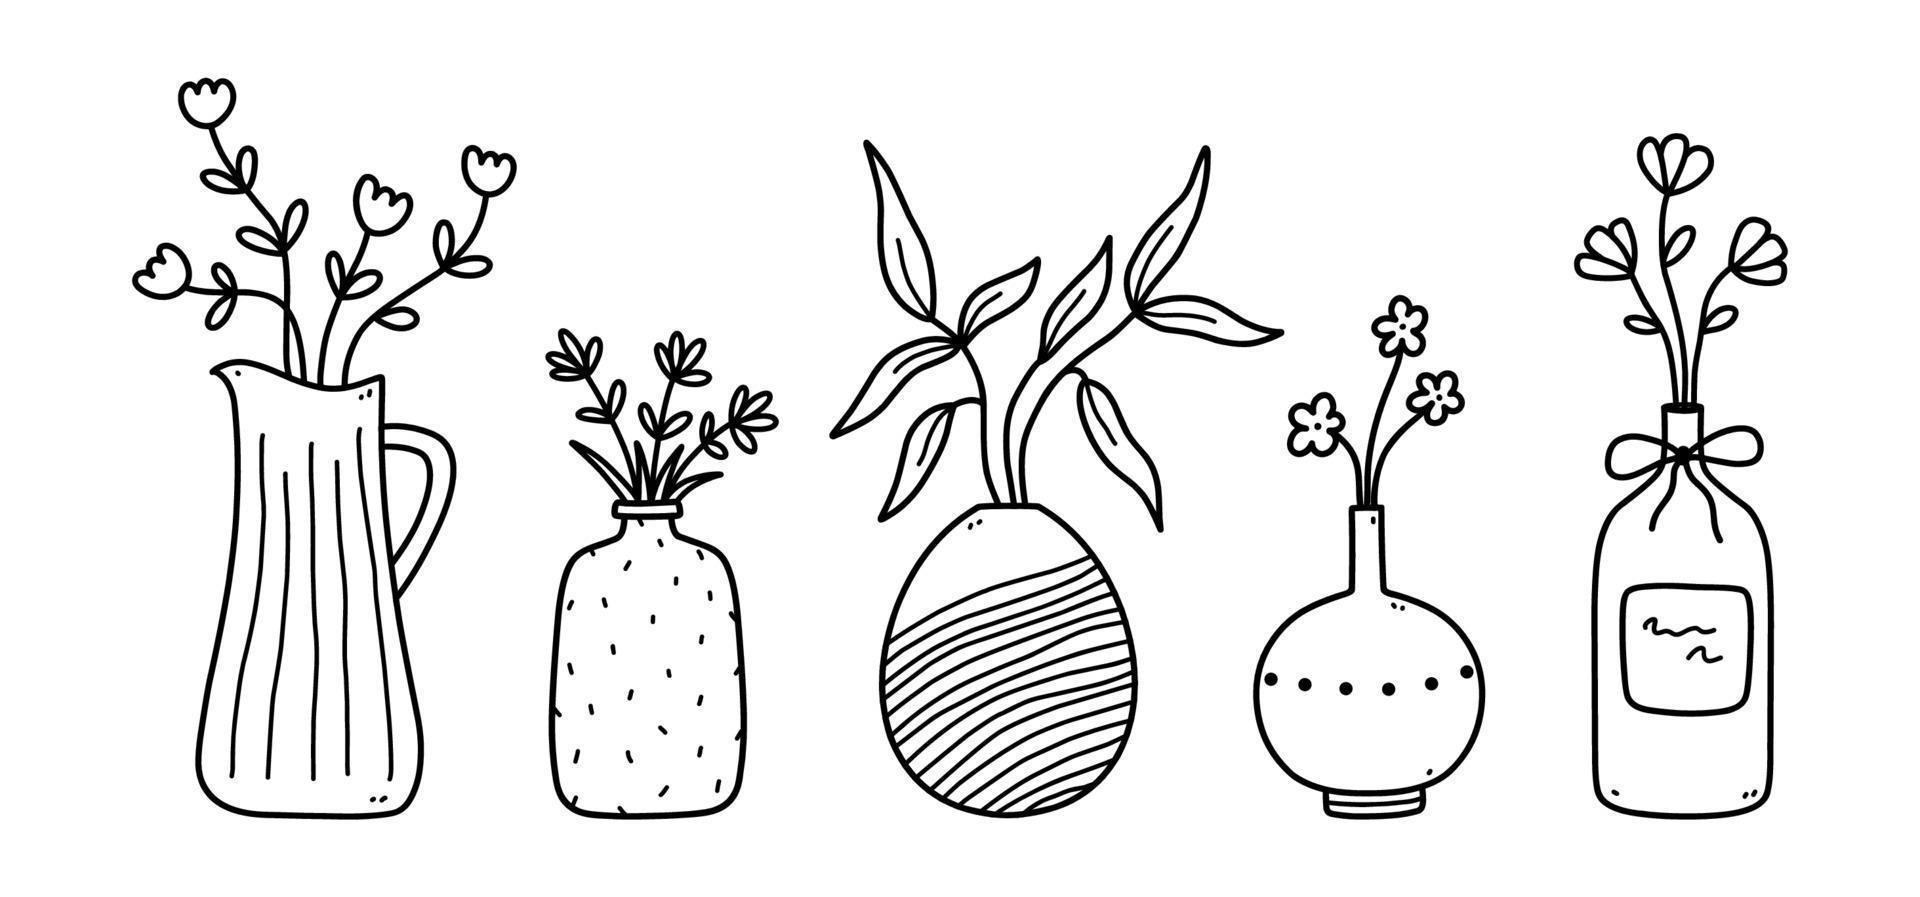 Set of cute flowers and twigs in ceramic vases isolated on white background. Vector hand-drawn illustration in doodle style. Perfect for cards, decorations, logo.